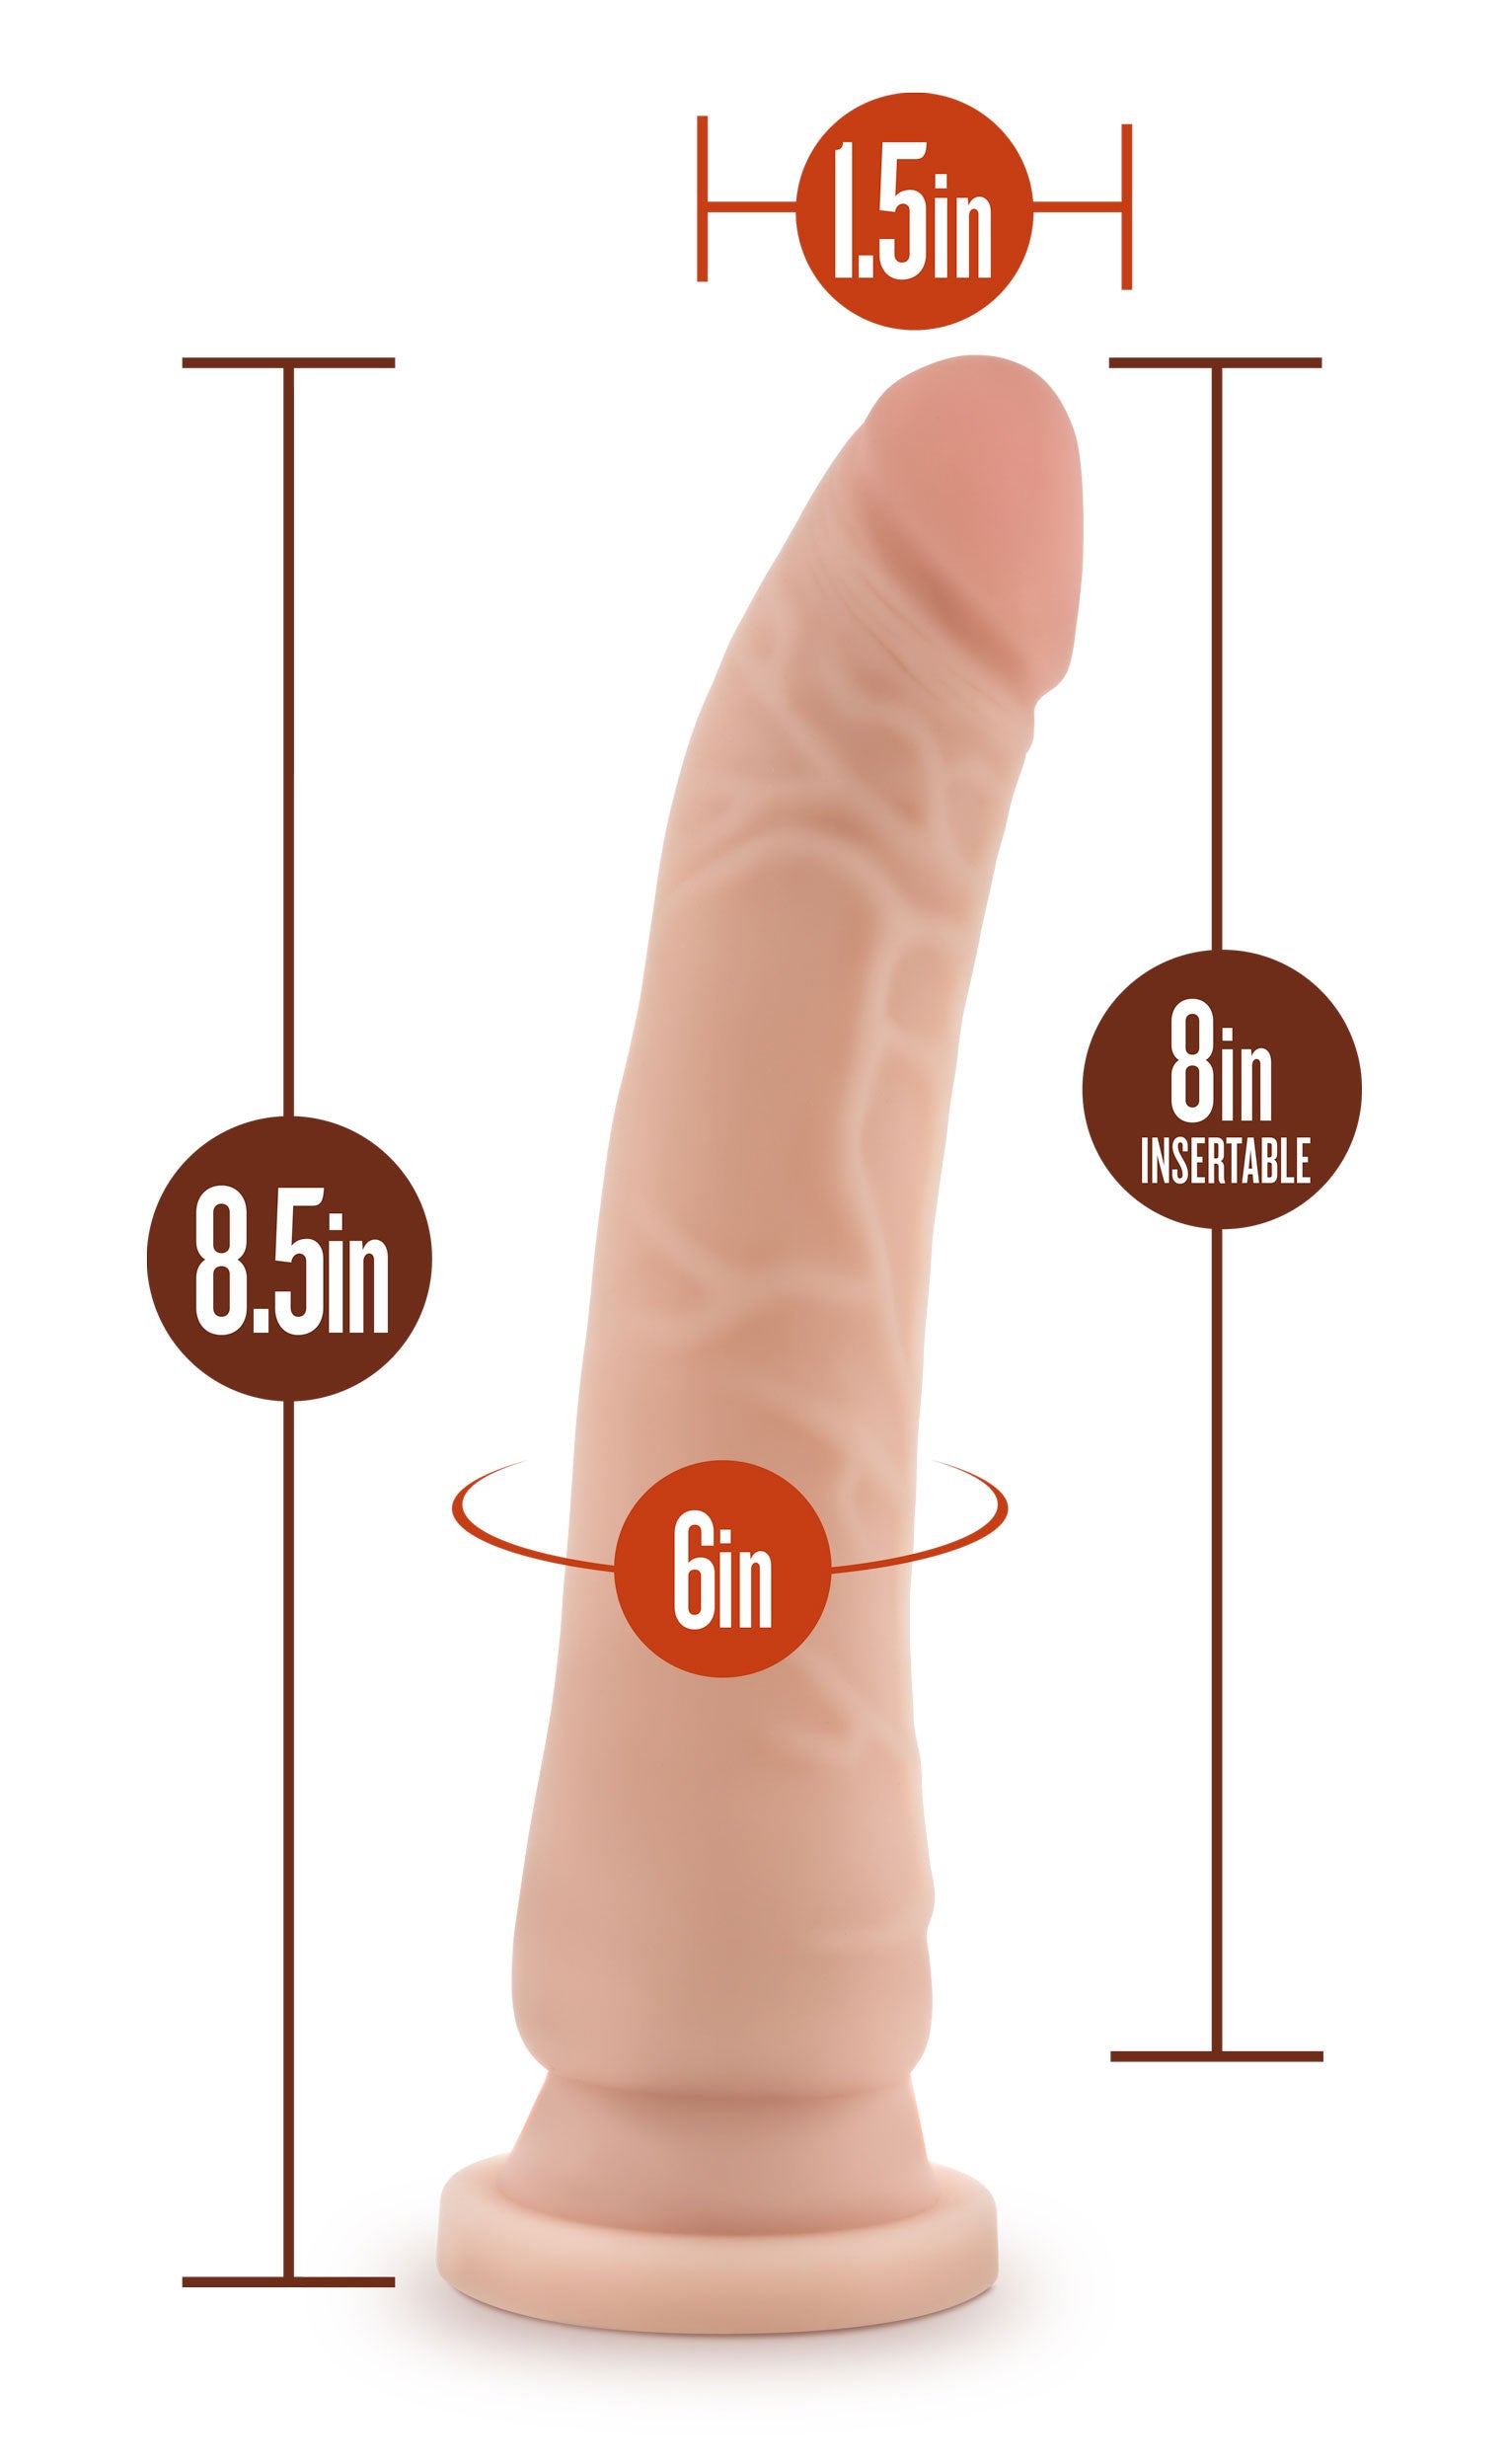 Dr. Skin Silicone - Dr. Noah - 8 Inch Dong With Suction Cup Vanilla